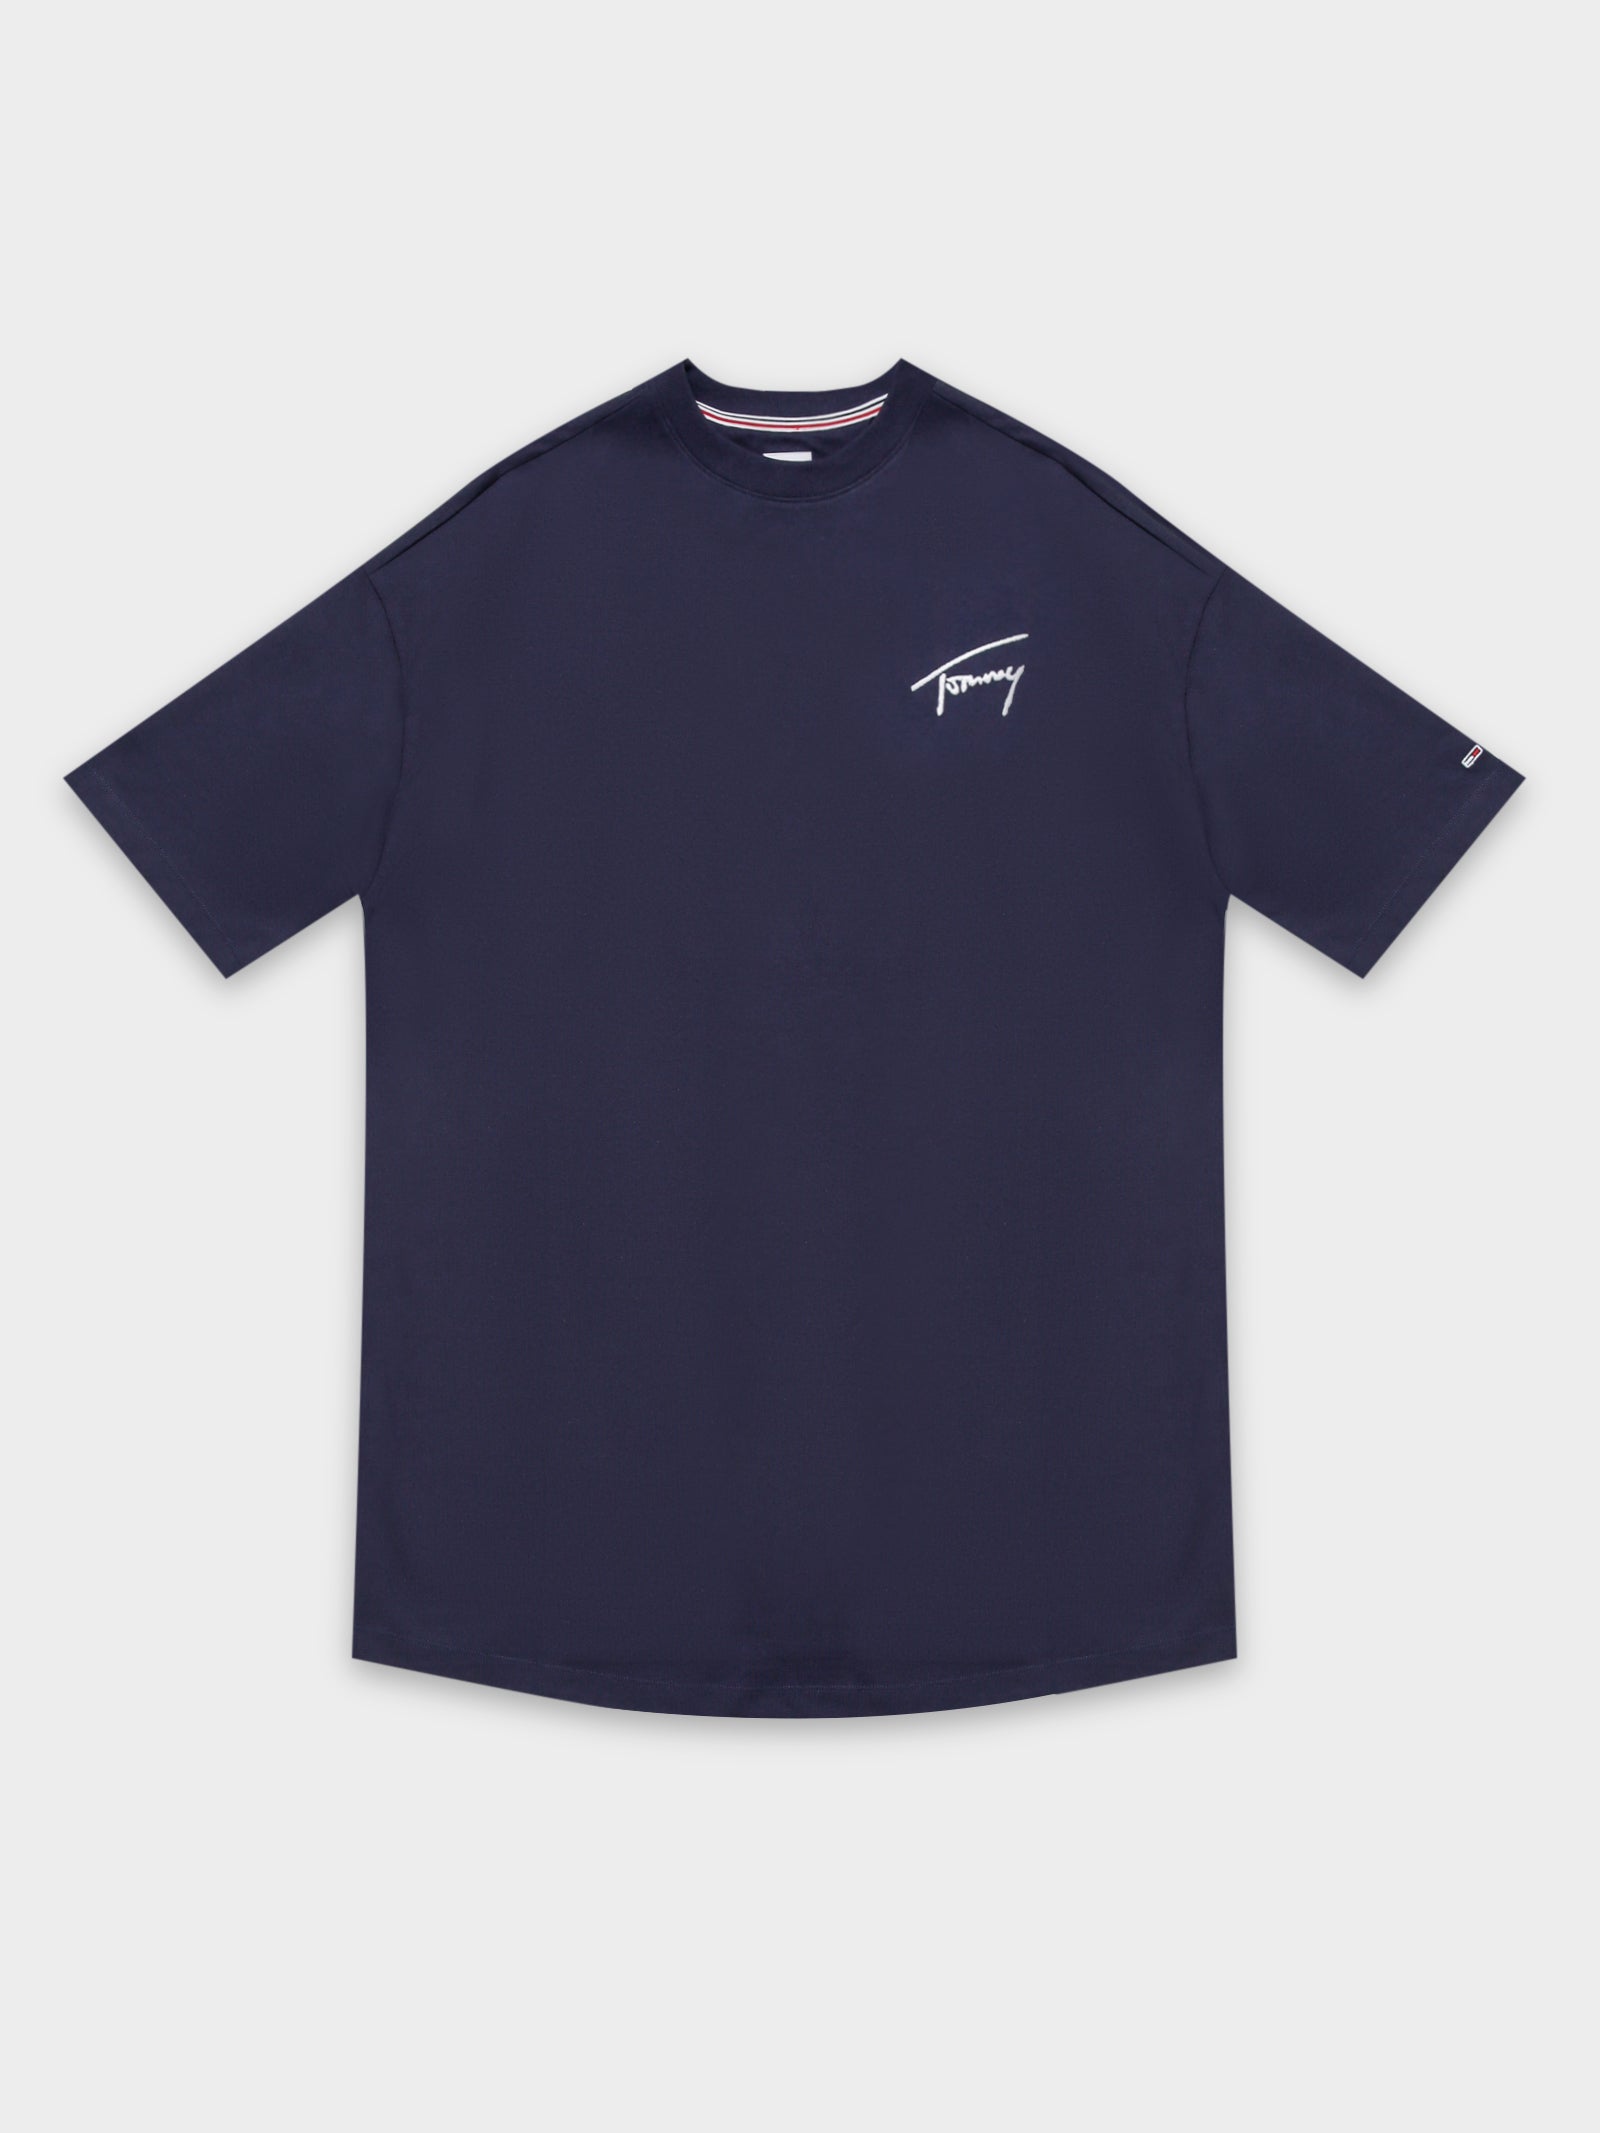 Tommy Signature T-Shirt Dress in Twilight Navy